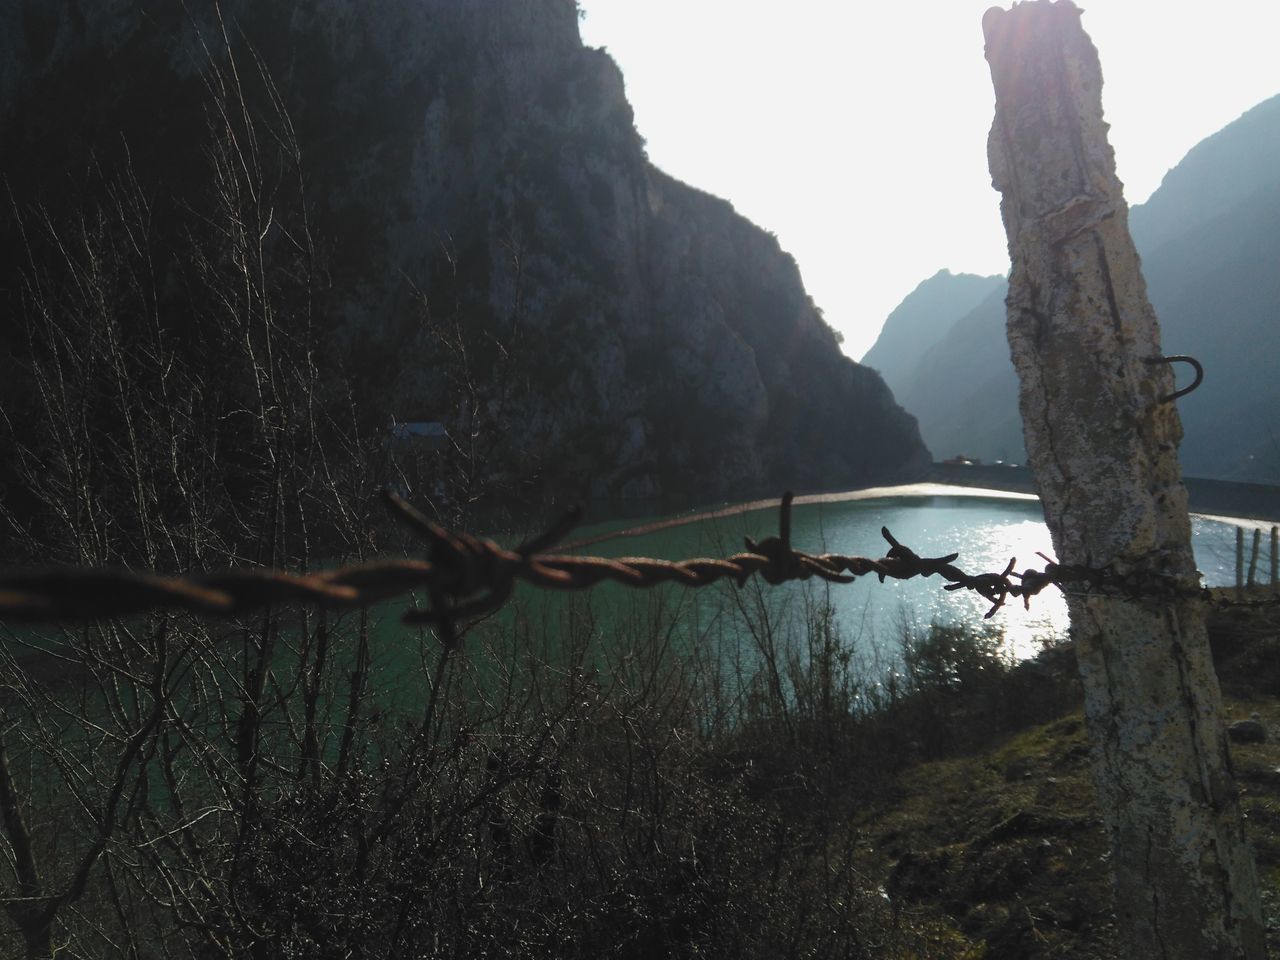 mountain, nature, outdoors, beauty in nature, protection, barbed wire, day, scenics, tranquility, no people, tree, sky, water, dead tree